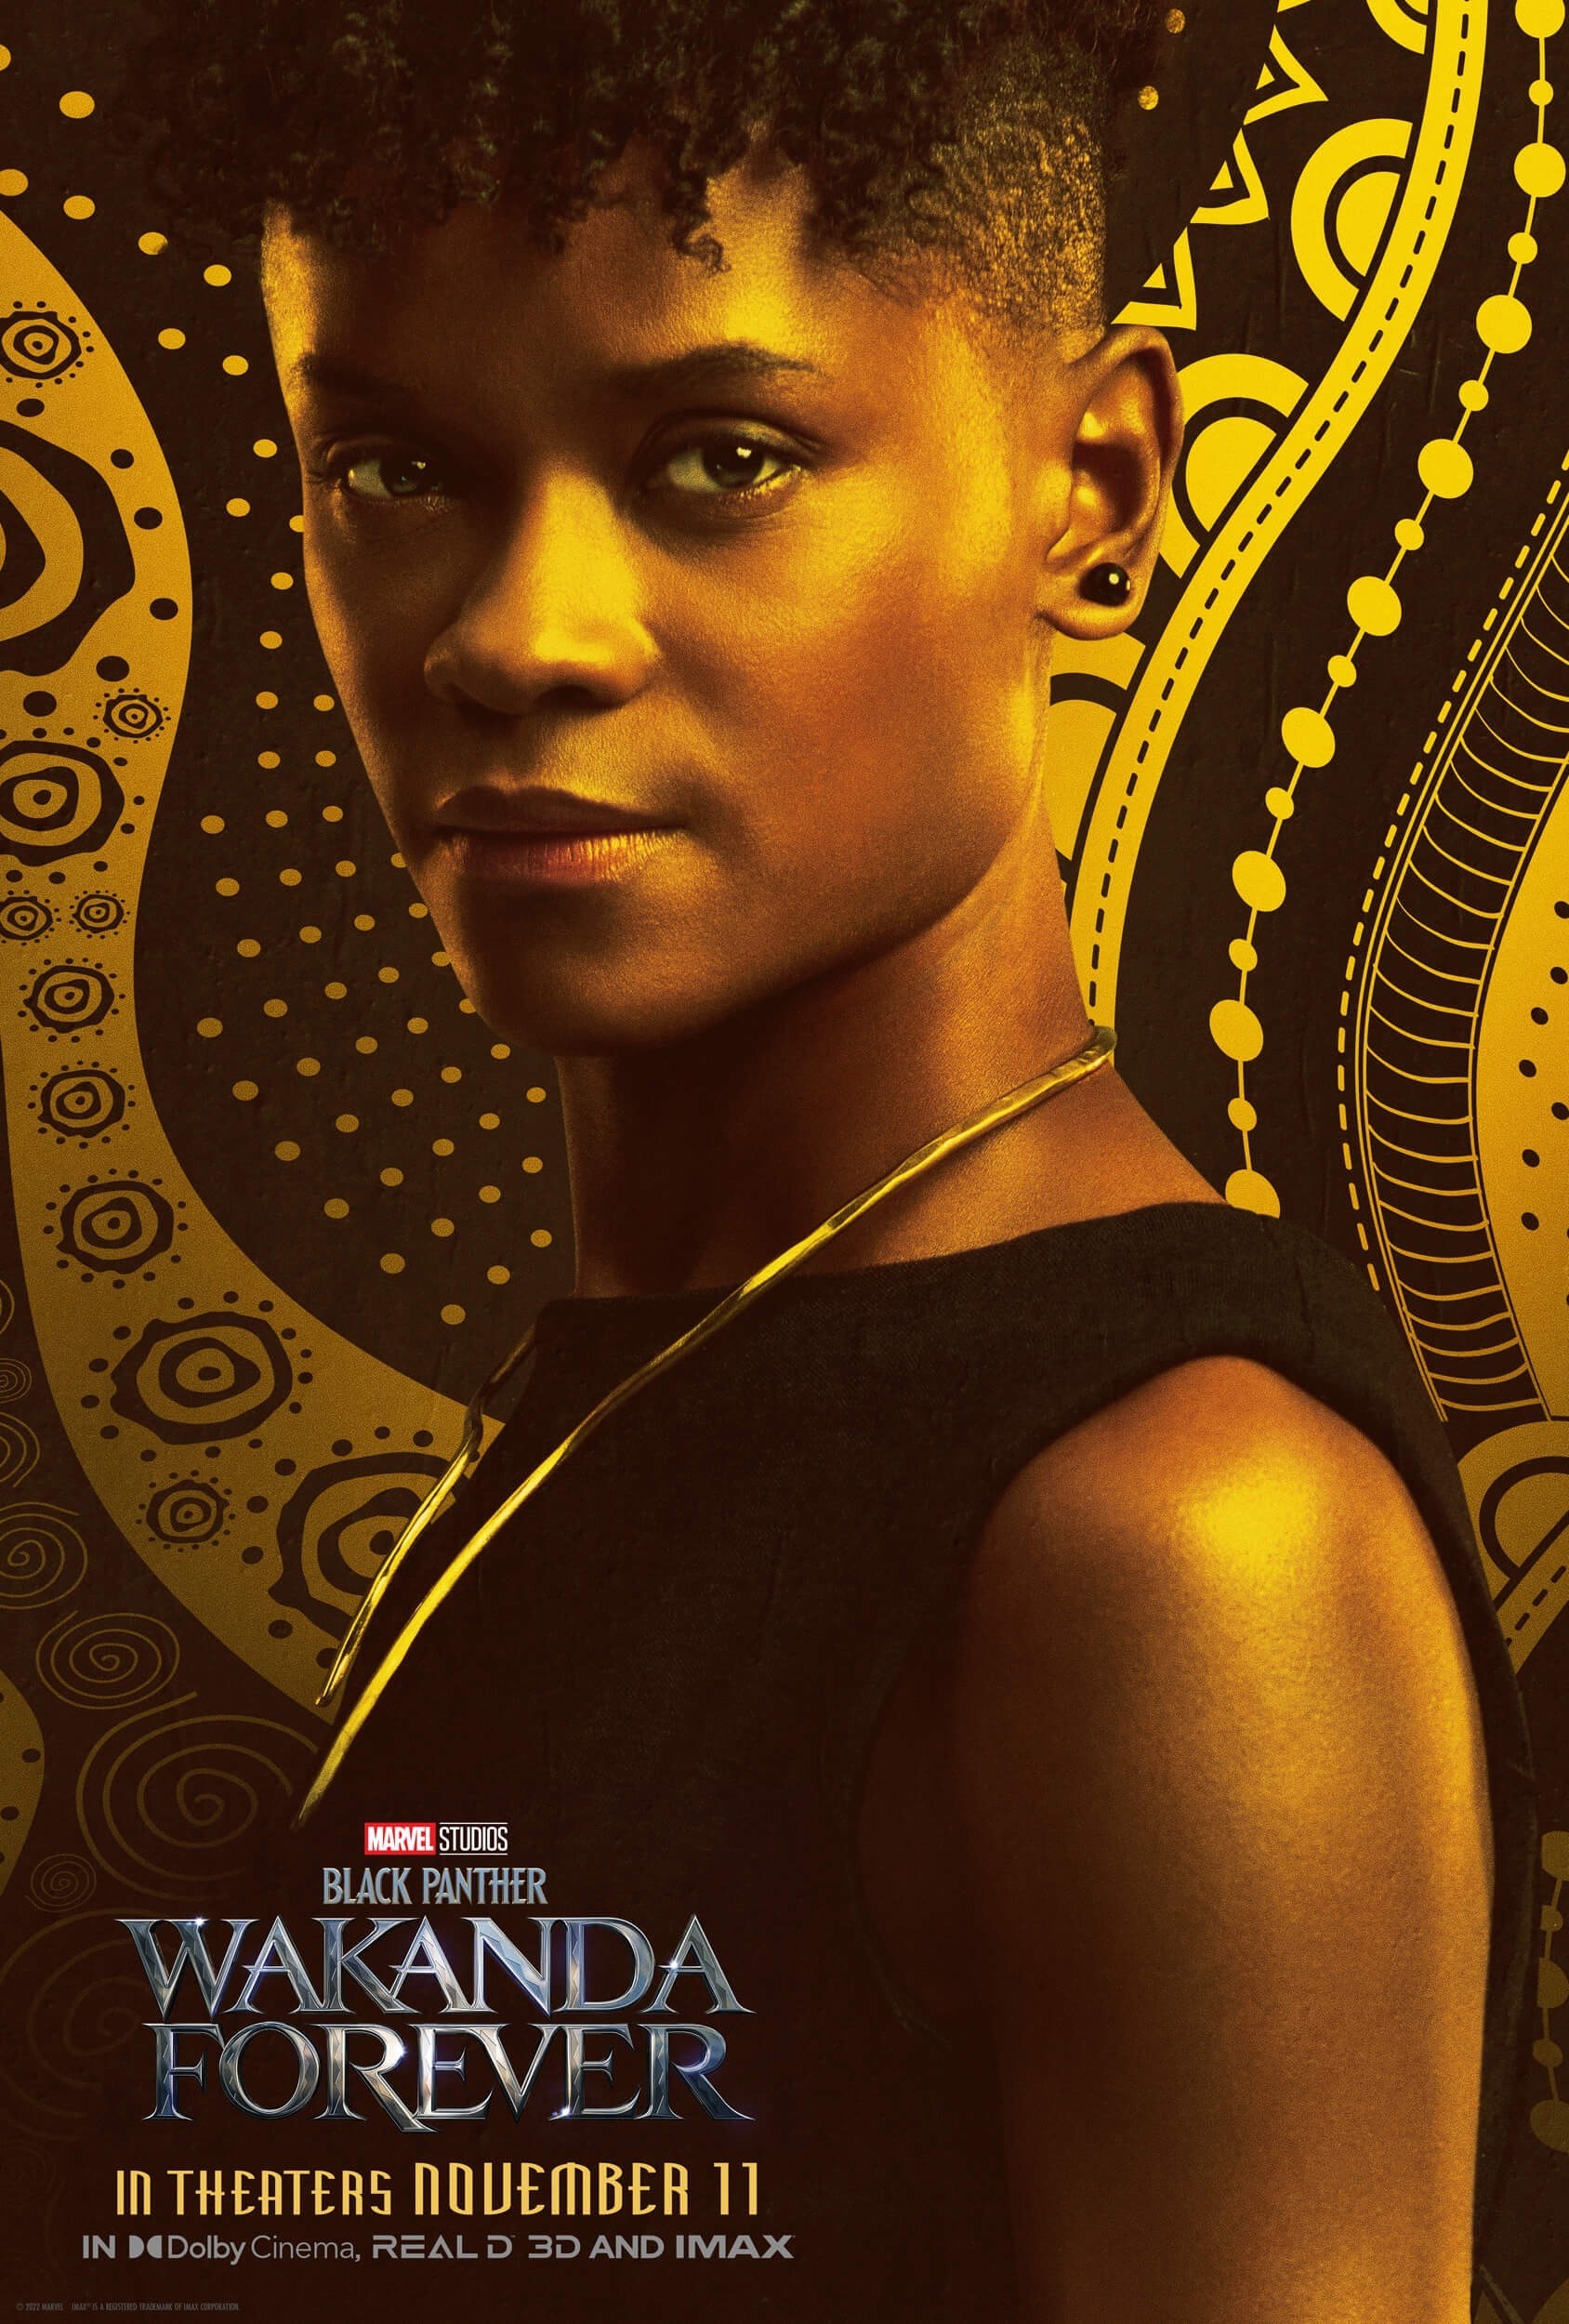 Close-up of Shuri in the movie poster